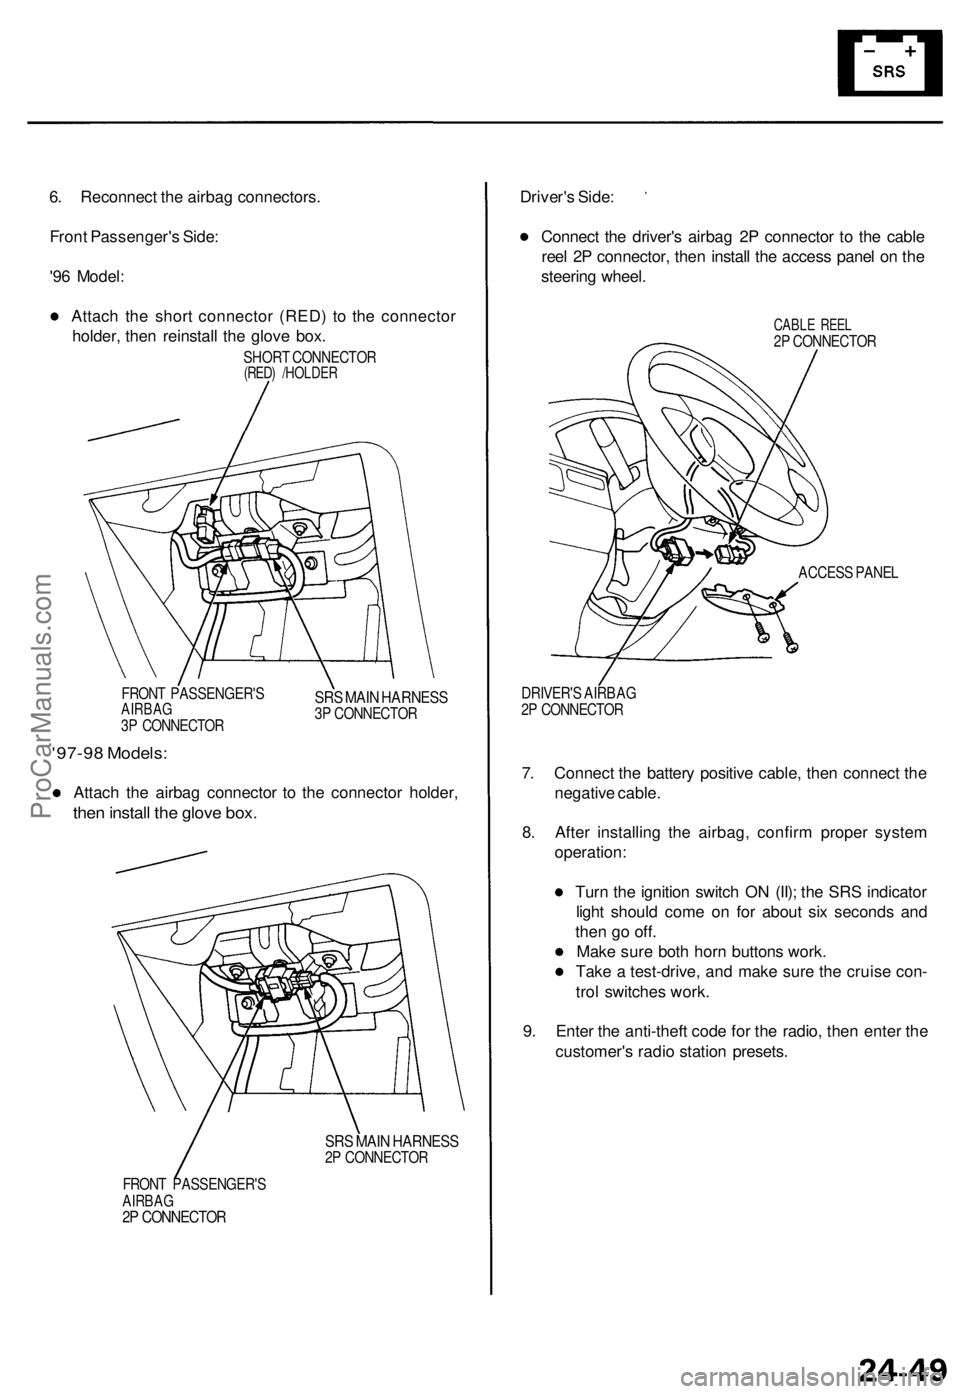 ACURA TL 1995  Service Repair Manual 
6. Reconnect the airbag connectors.

Front Passenger's Side:

'96 Model:

Attach the short connector (RED) to the connector

holder, then reinstall the glove box.

SHORT CONNECTOR

(RED) /HOL